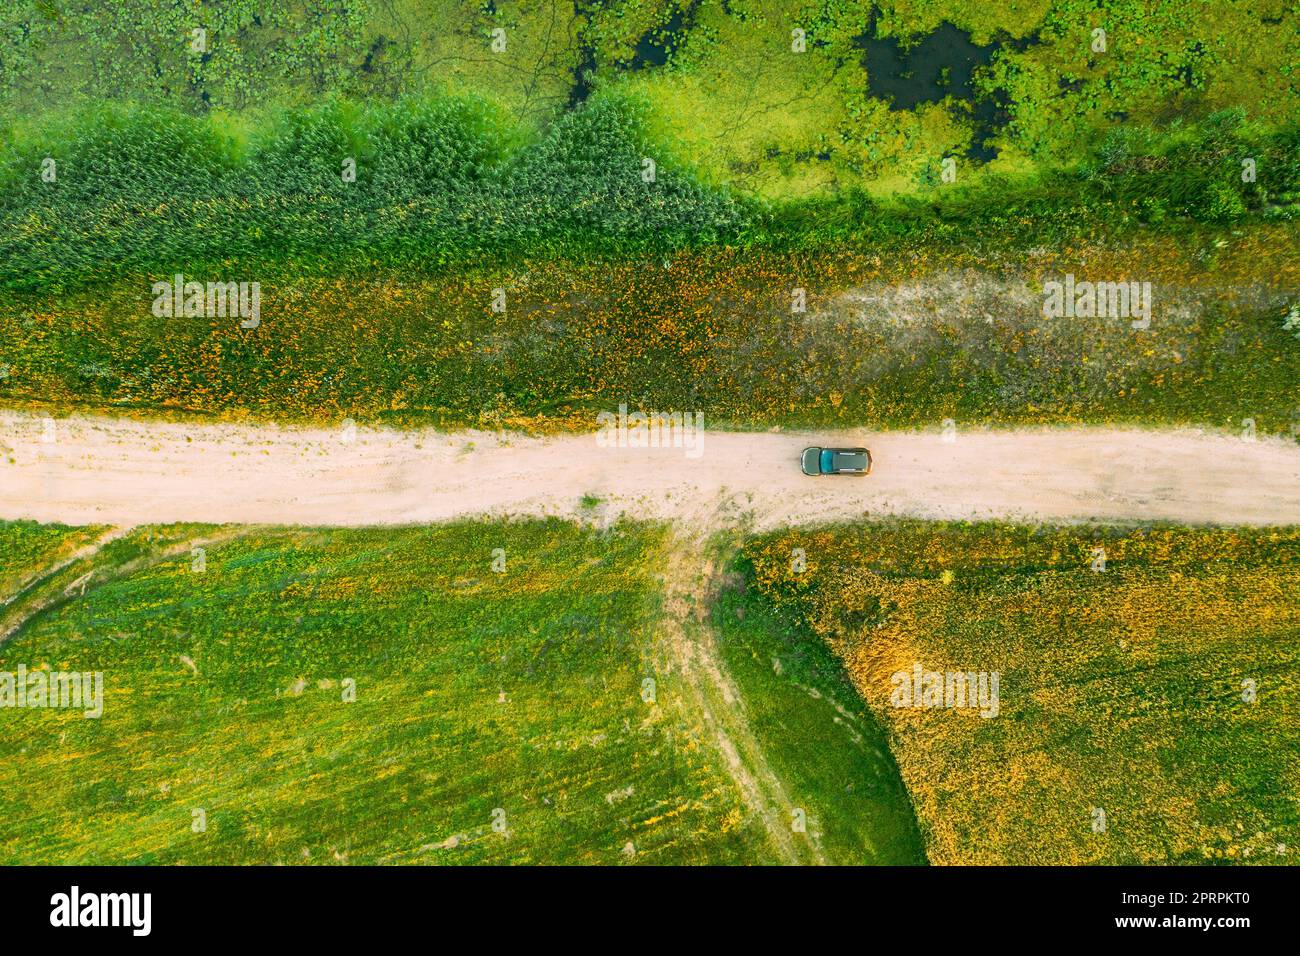 Aerial View Of Car SUV Parked On Countryside Road Between Rural Field And Marsh Bog Swamp Landscape. Summer Day Stock Photo